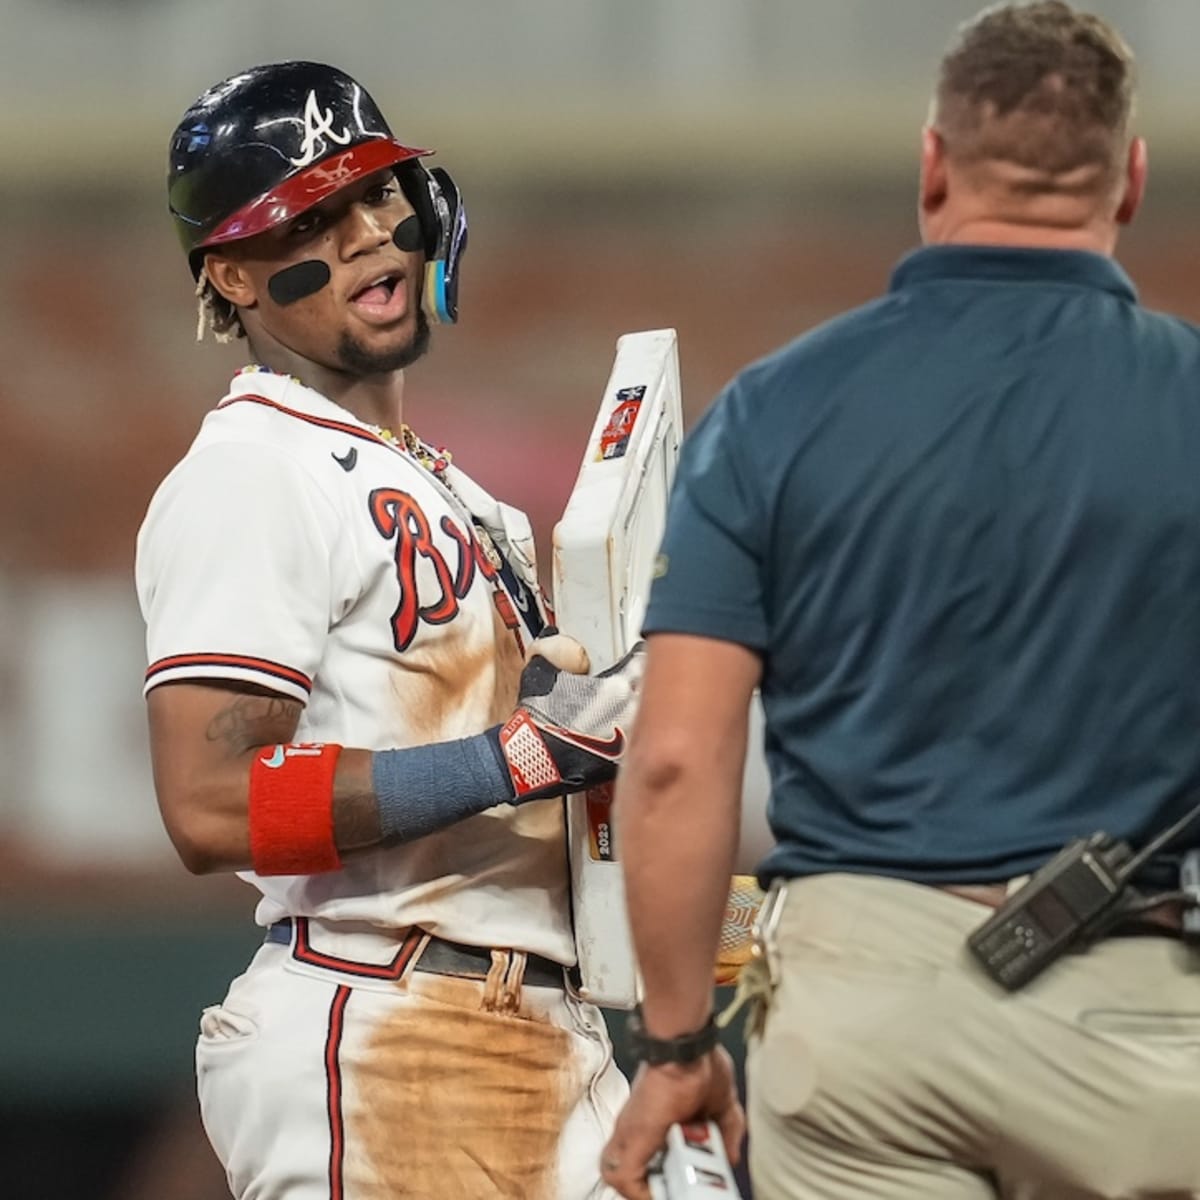 Cubs will face Ronald Acuna Jr. in his 2022 debut on Thursday night